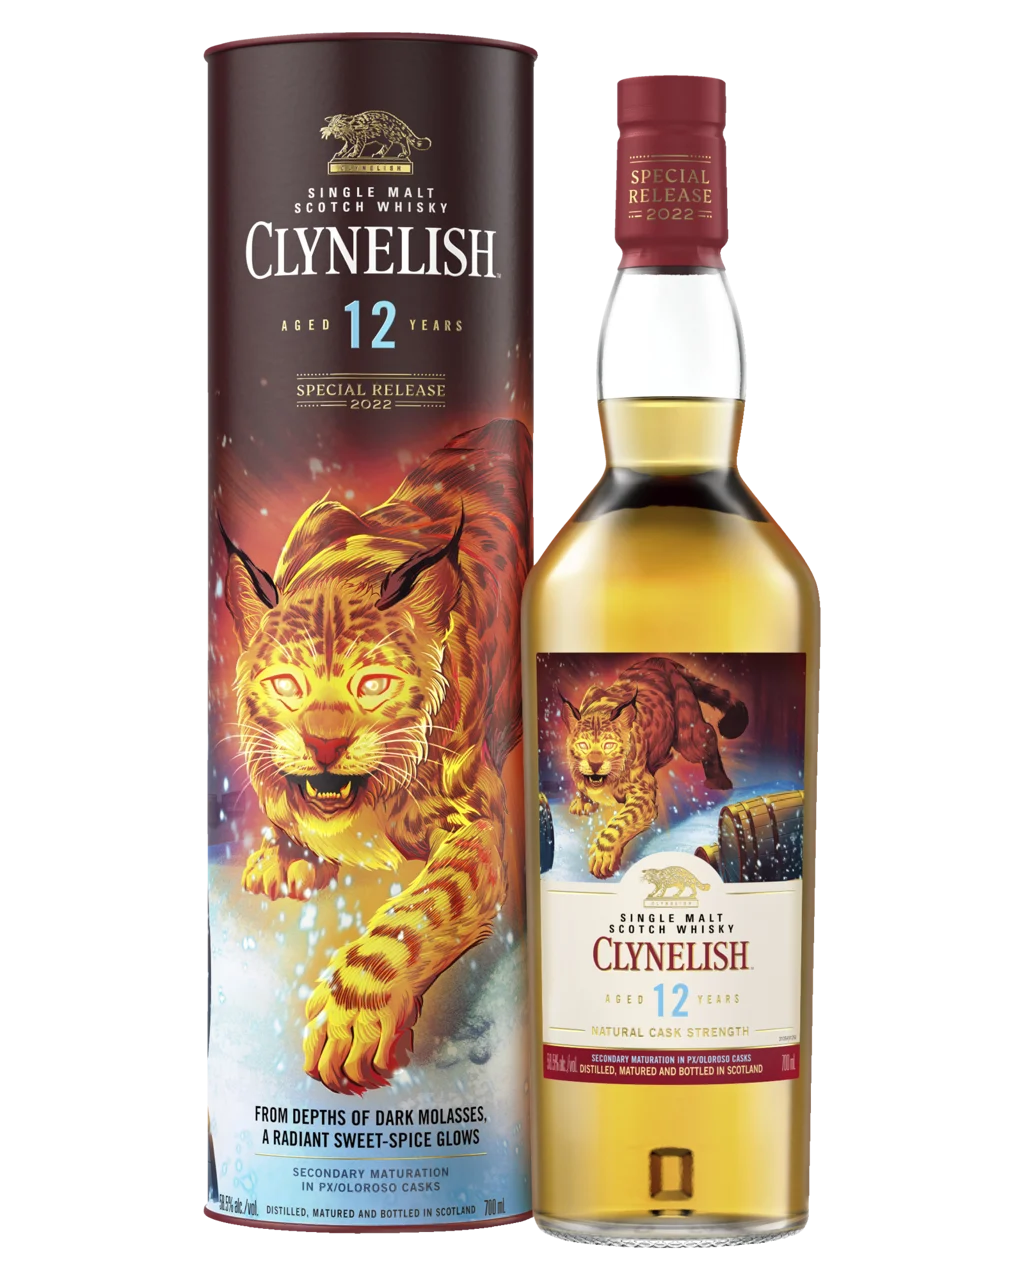 Clynelish 12 Year Old Single Malt Scotch Whisky - Special Release 2022